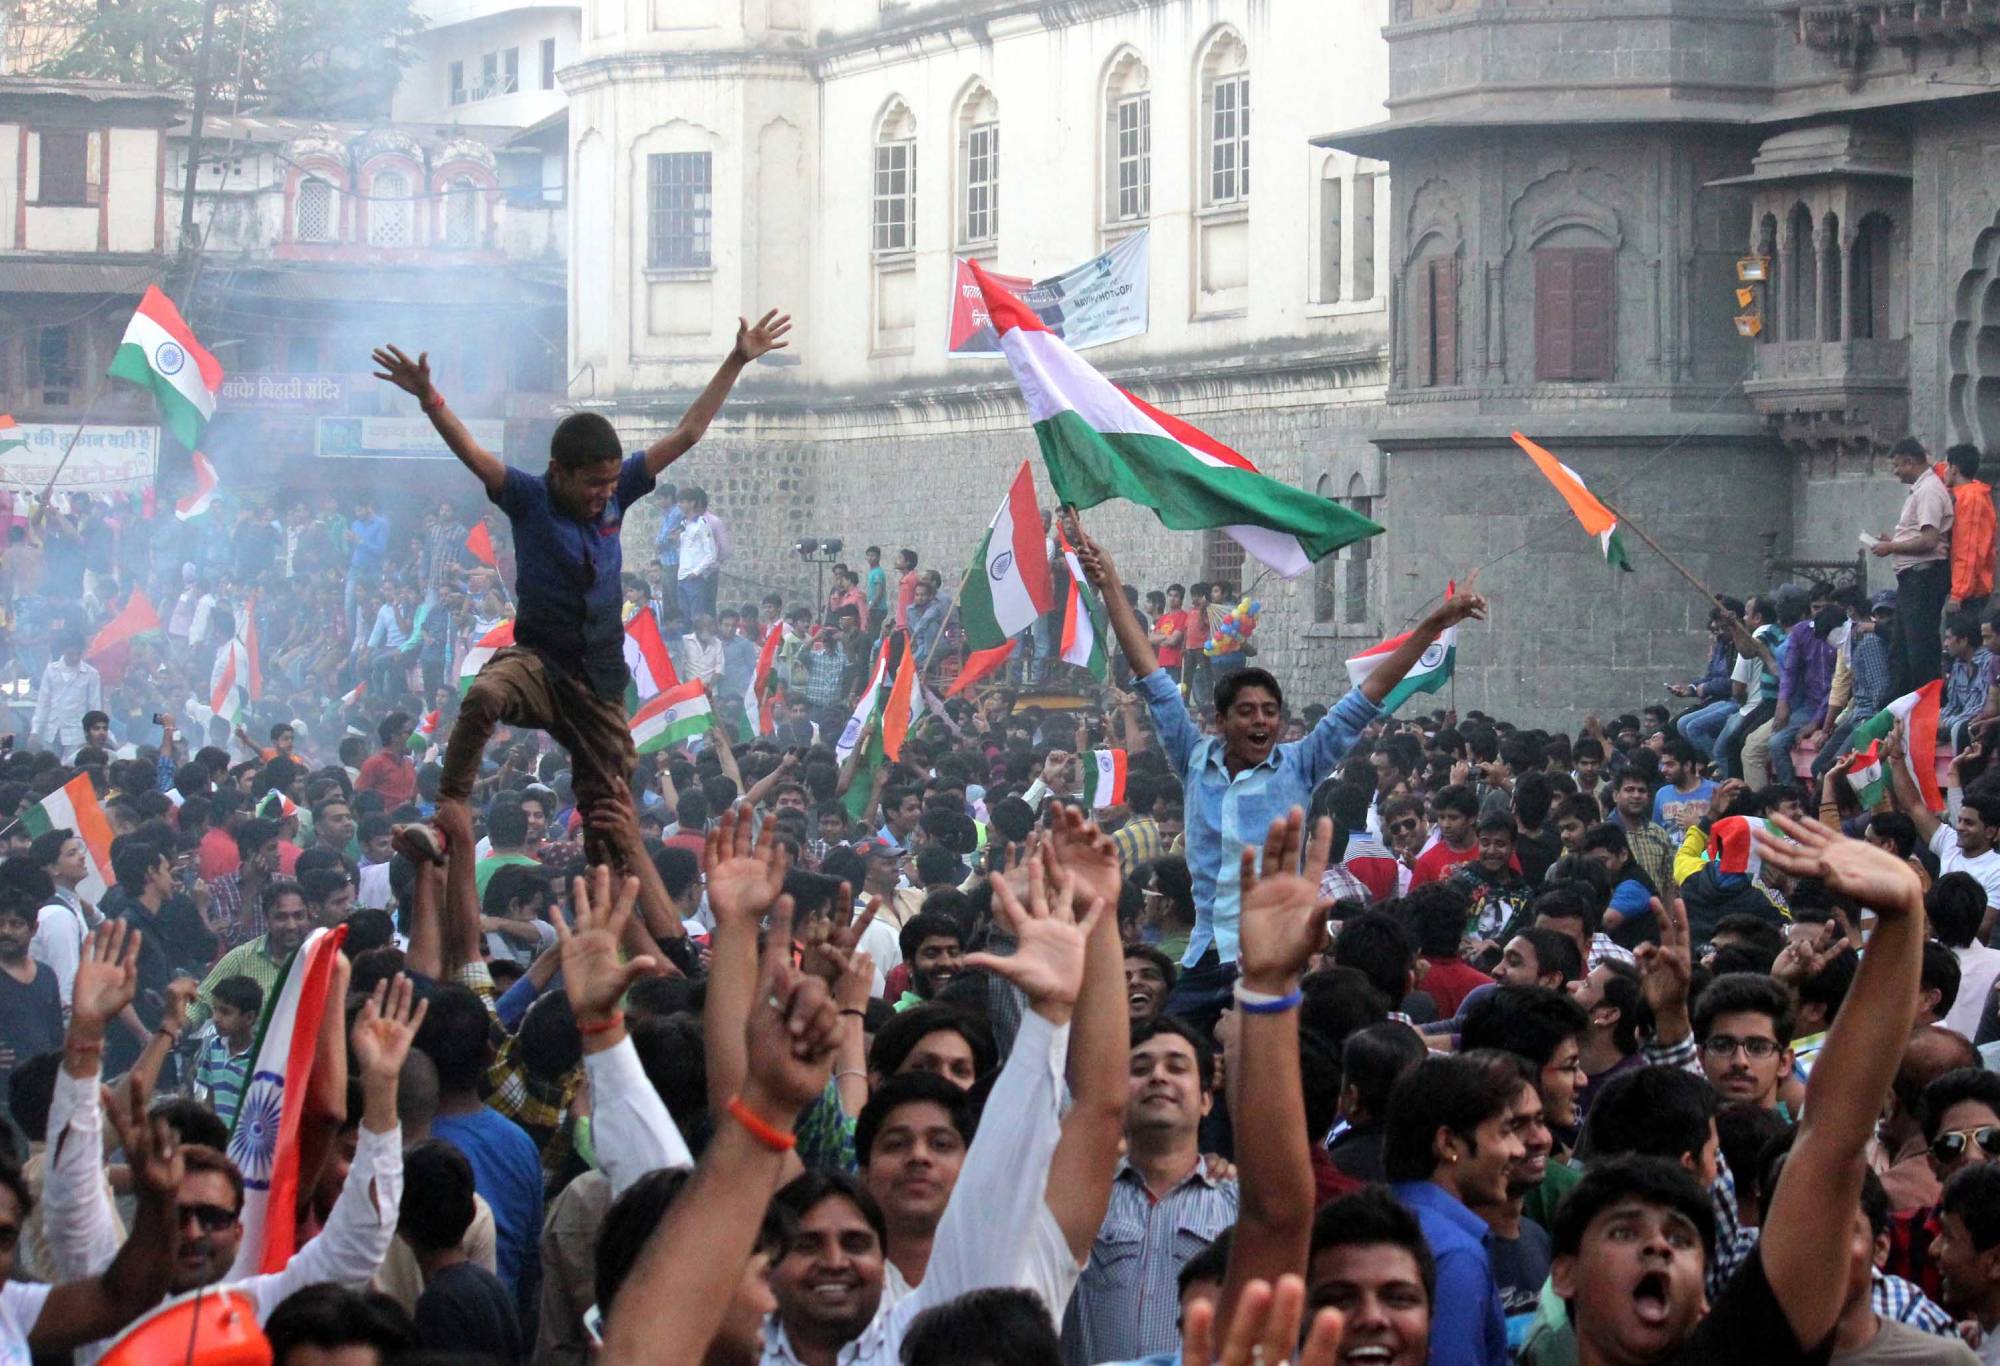 INDORE, INDIA - FEBRUARY 15: Cricket fans celebrate India's victory over Pakistan in an ICC World Cup 2015 match, on February 15, 2015 in Indore, India. Cricket fans distributed sweets and burst firecrackers, while many came out on roads and danced to the beating of drums as soon as Mohit Sharma took the last wicket of Sohail Khan to seal Pakistan's fate in Adelaide. India have won all their previous World Cup matches against Pakistan, but Pakistani media and fans were hoping against hope for a first-ever success. (Photo By Shankar Mourya/Hindustan Times via Getty Images)